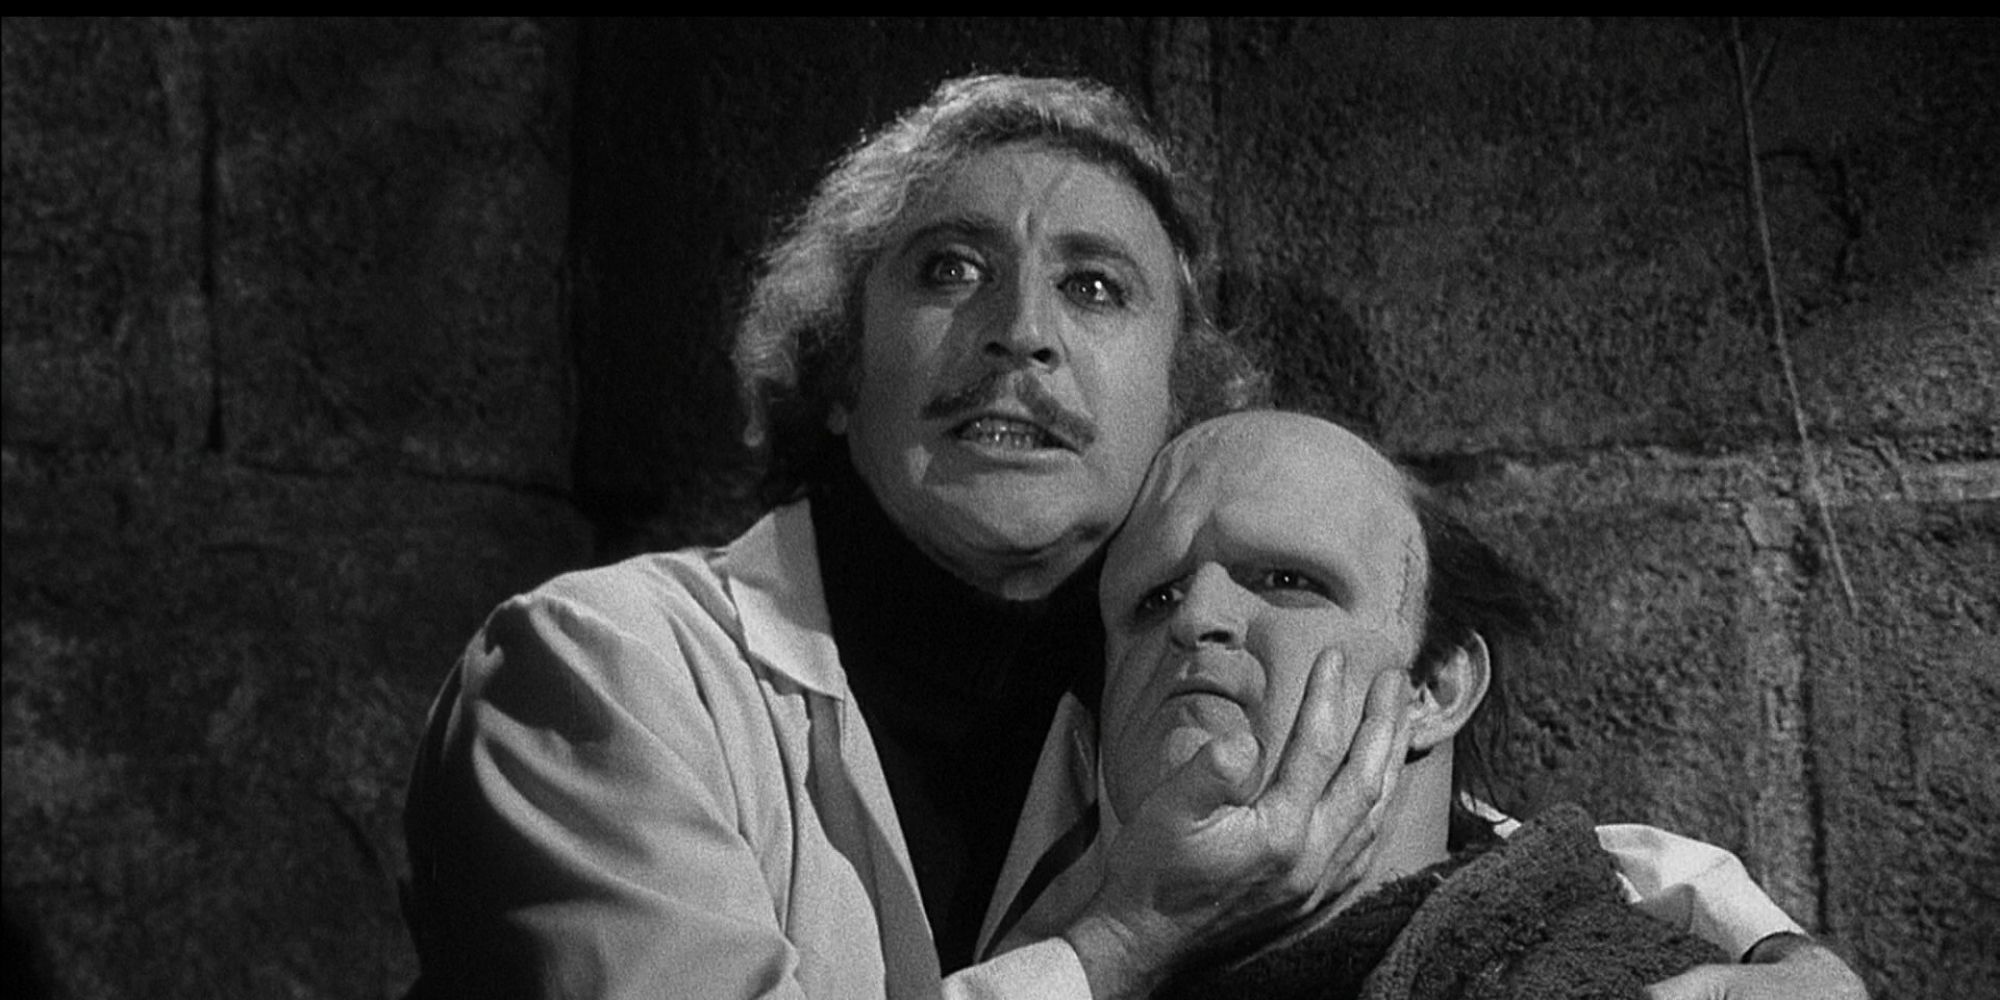 Gene Wilder as Dr. Frankenstein holding Peter Boyle as The Monster by the chin in Young Frankenstein